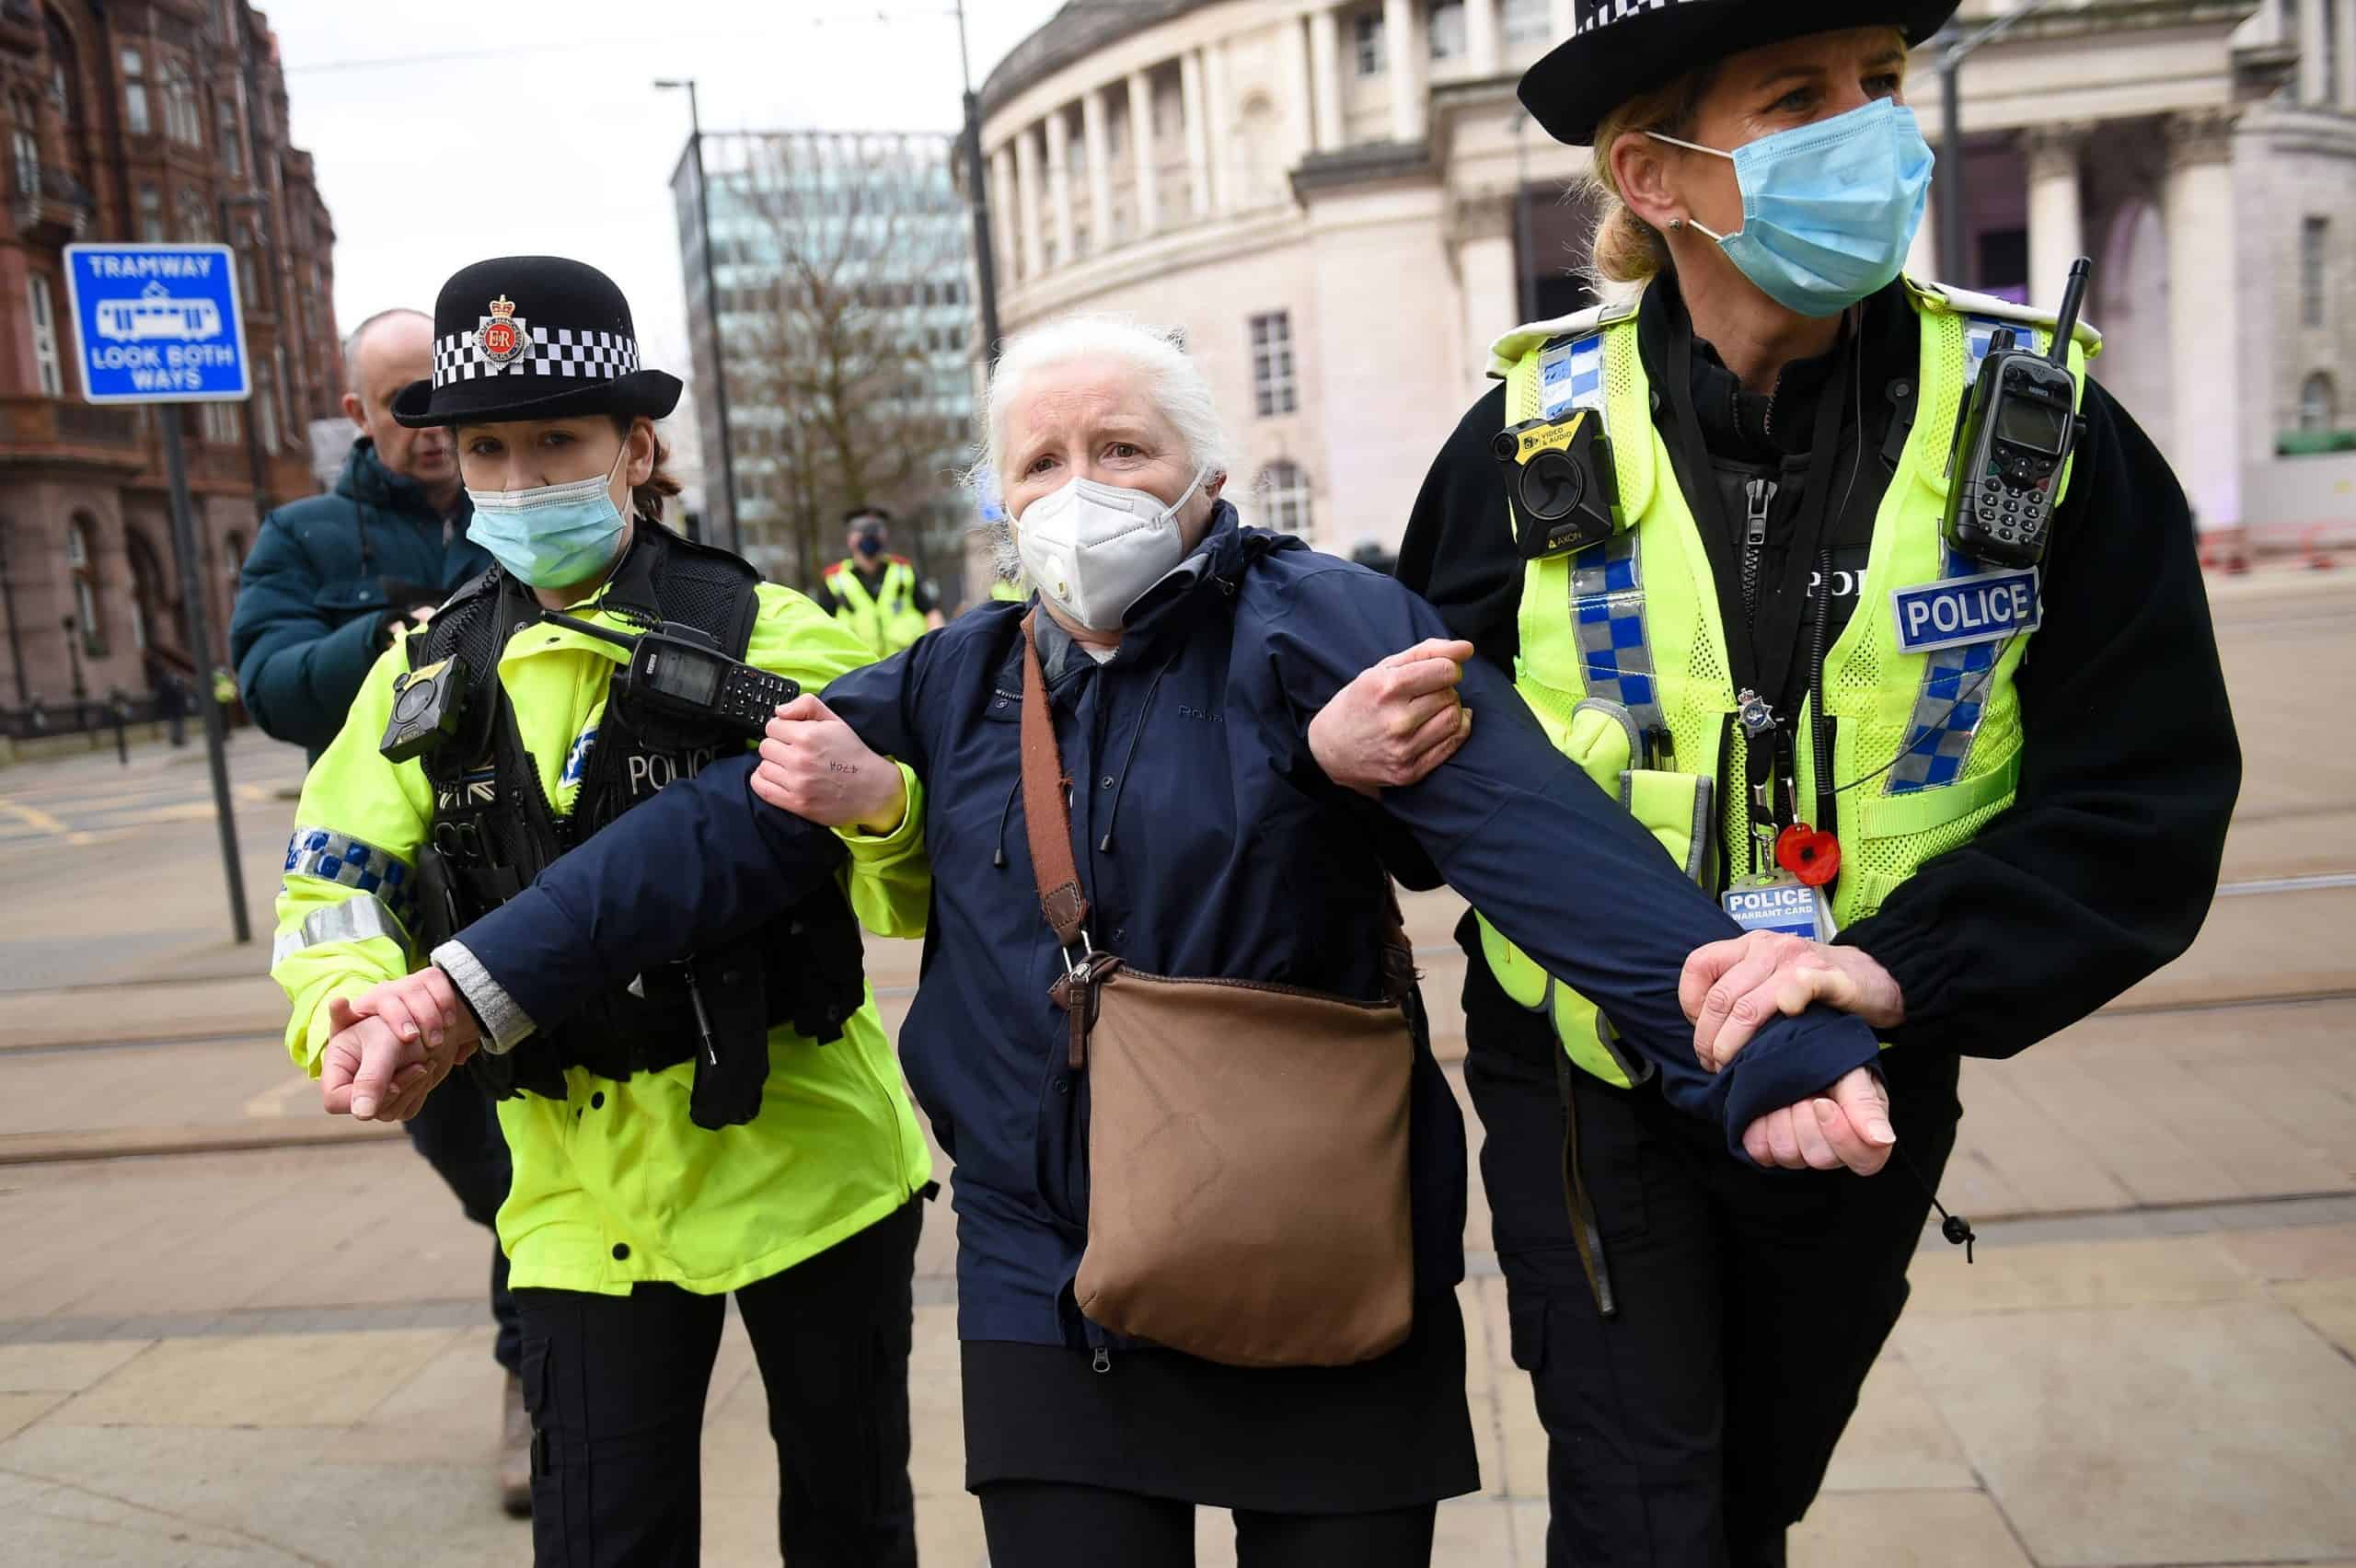 61 year old woman fined £10,000 for organising protest against 1% pay rise for nurses